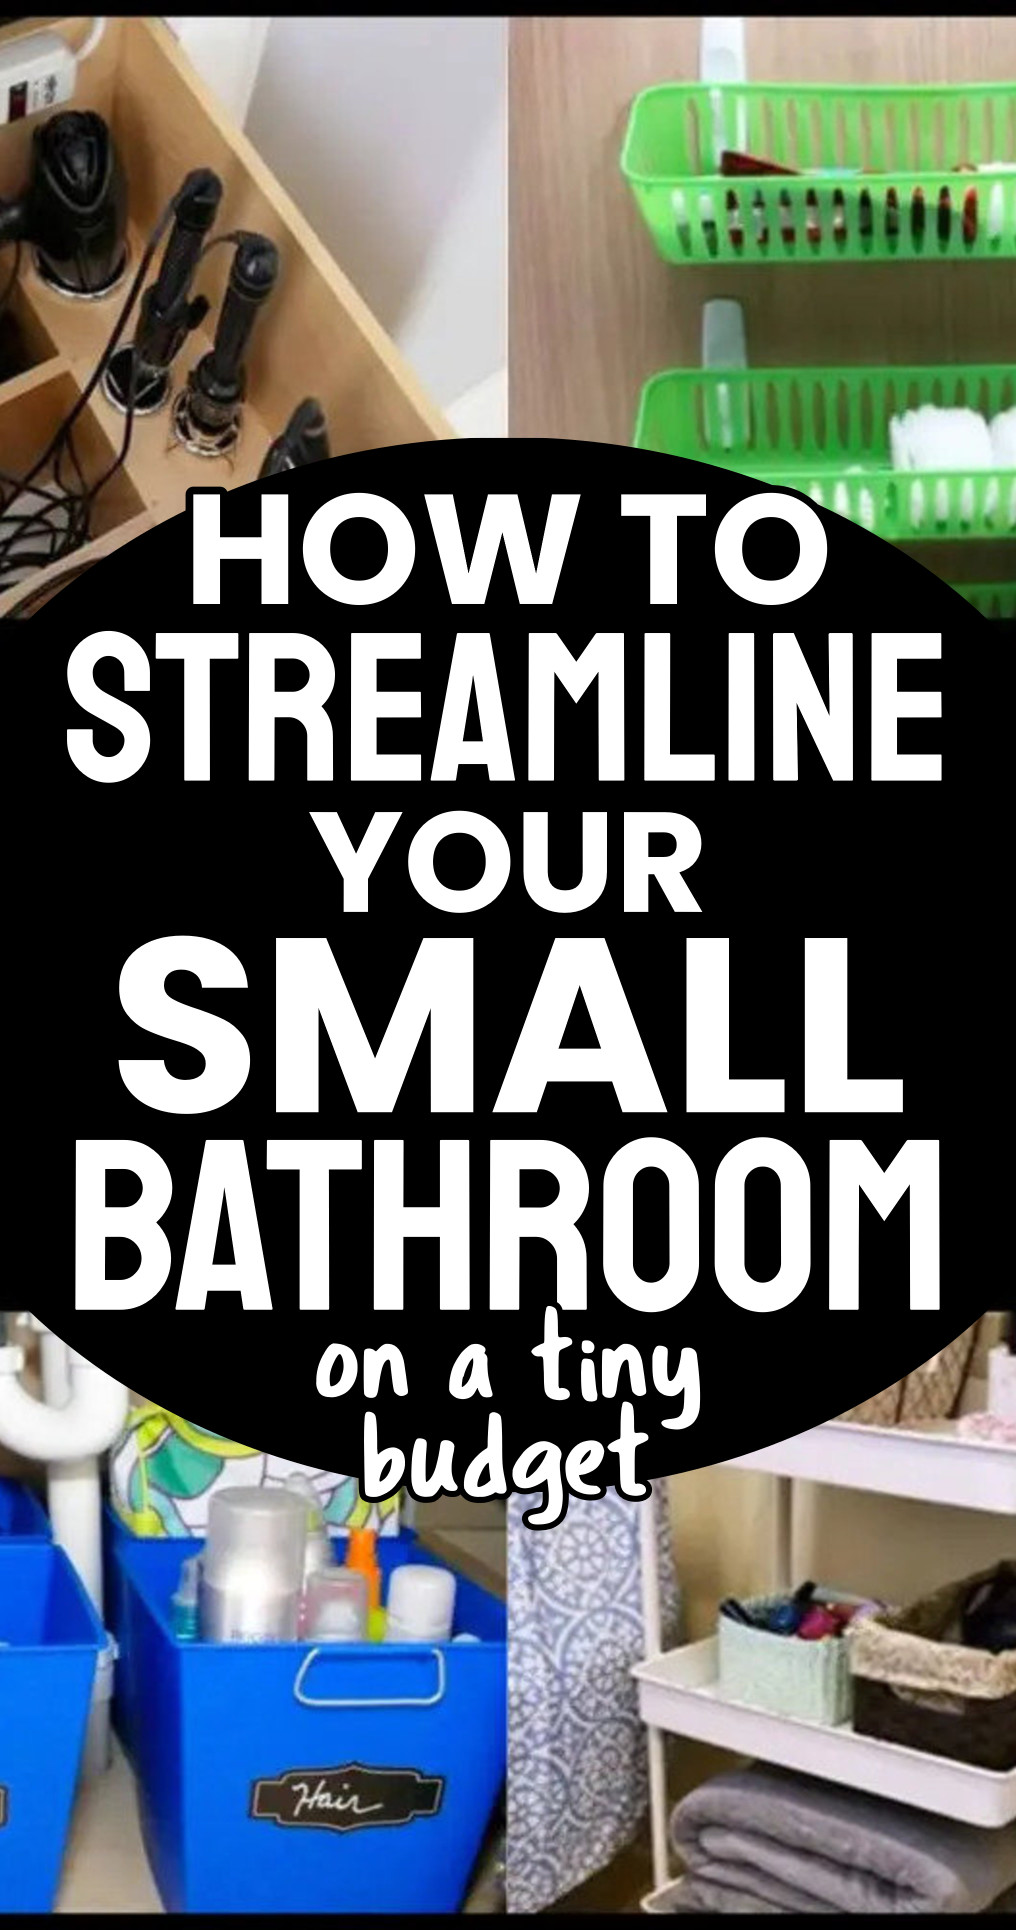 how to streamline your small bathroom on a tiny budget